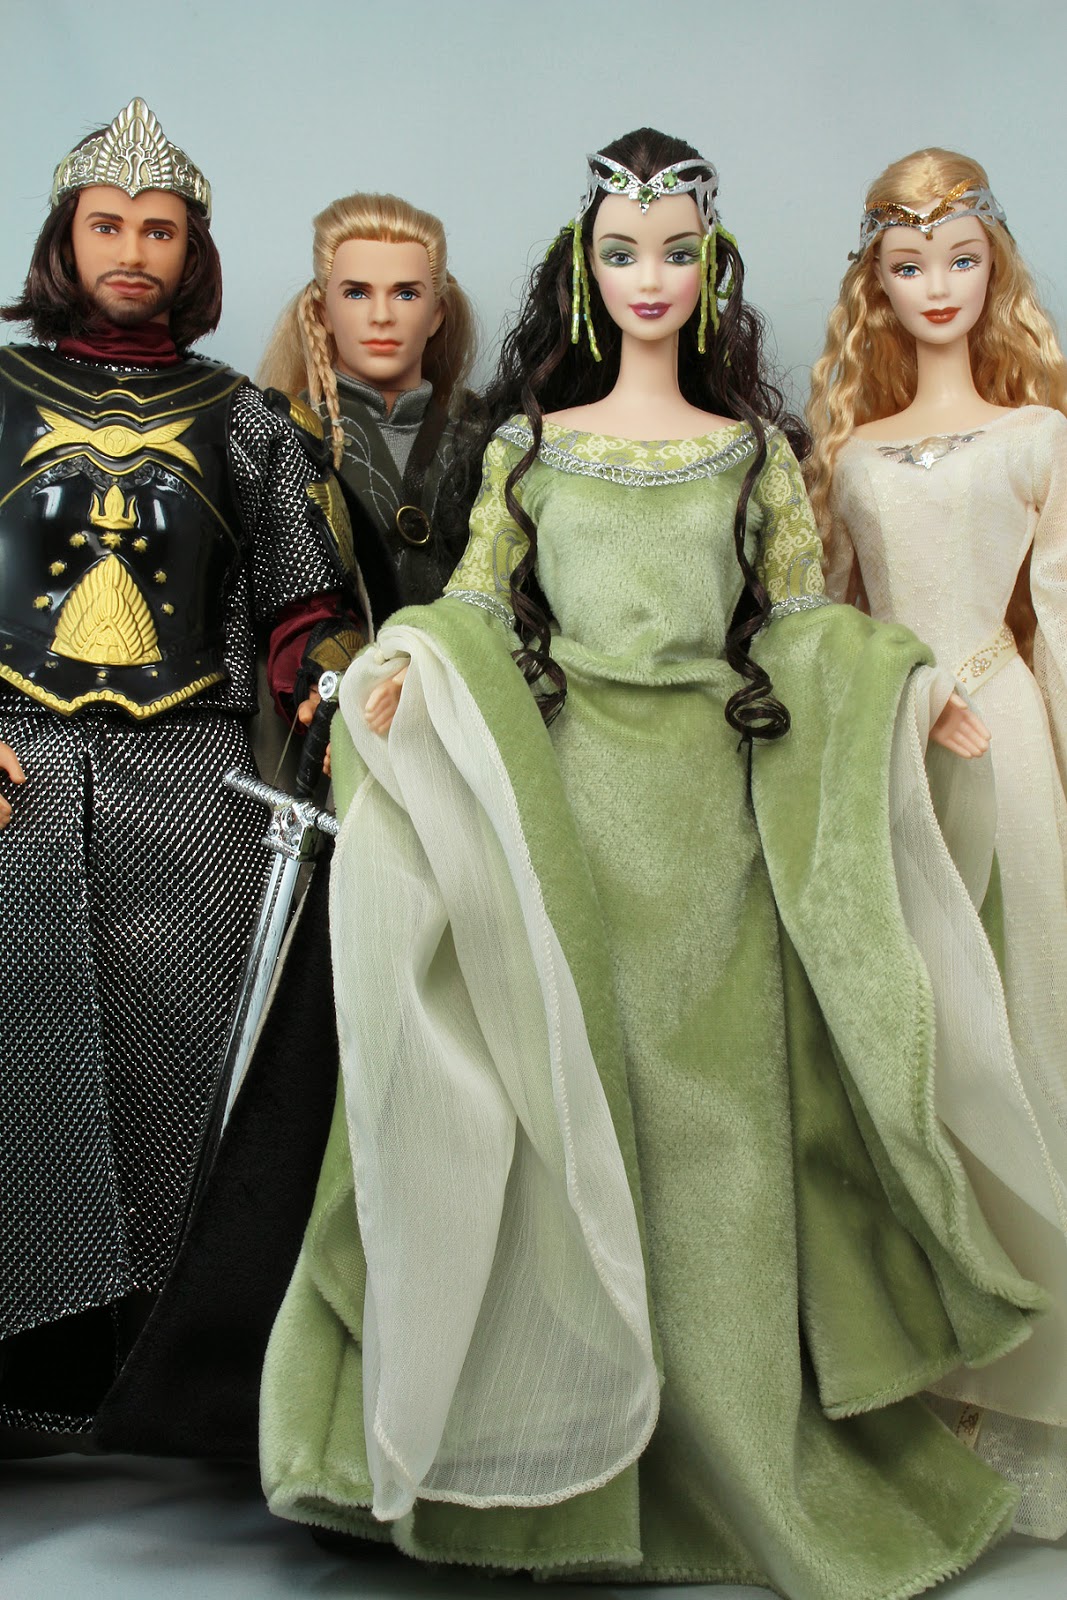 Lord of the Rings Dolls.